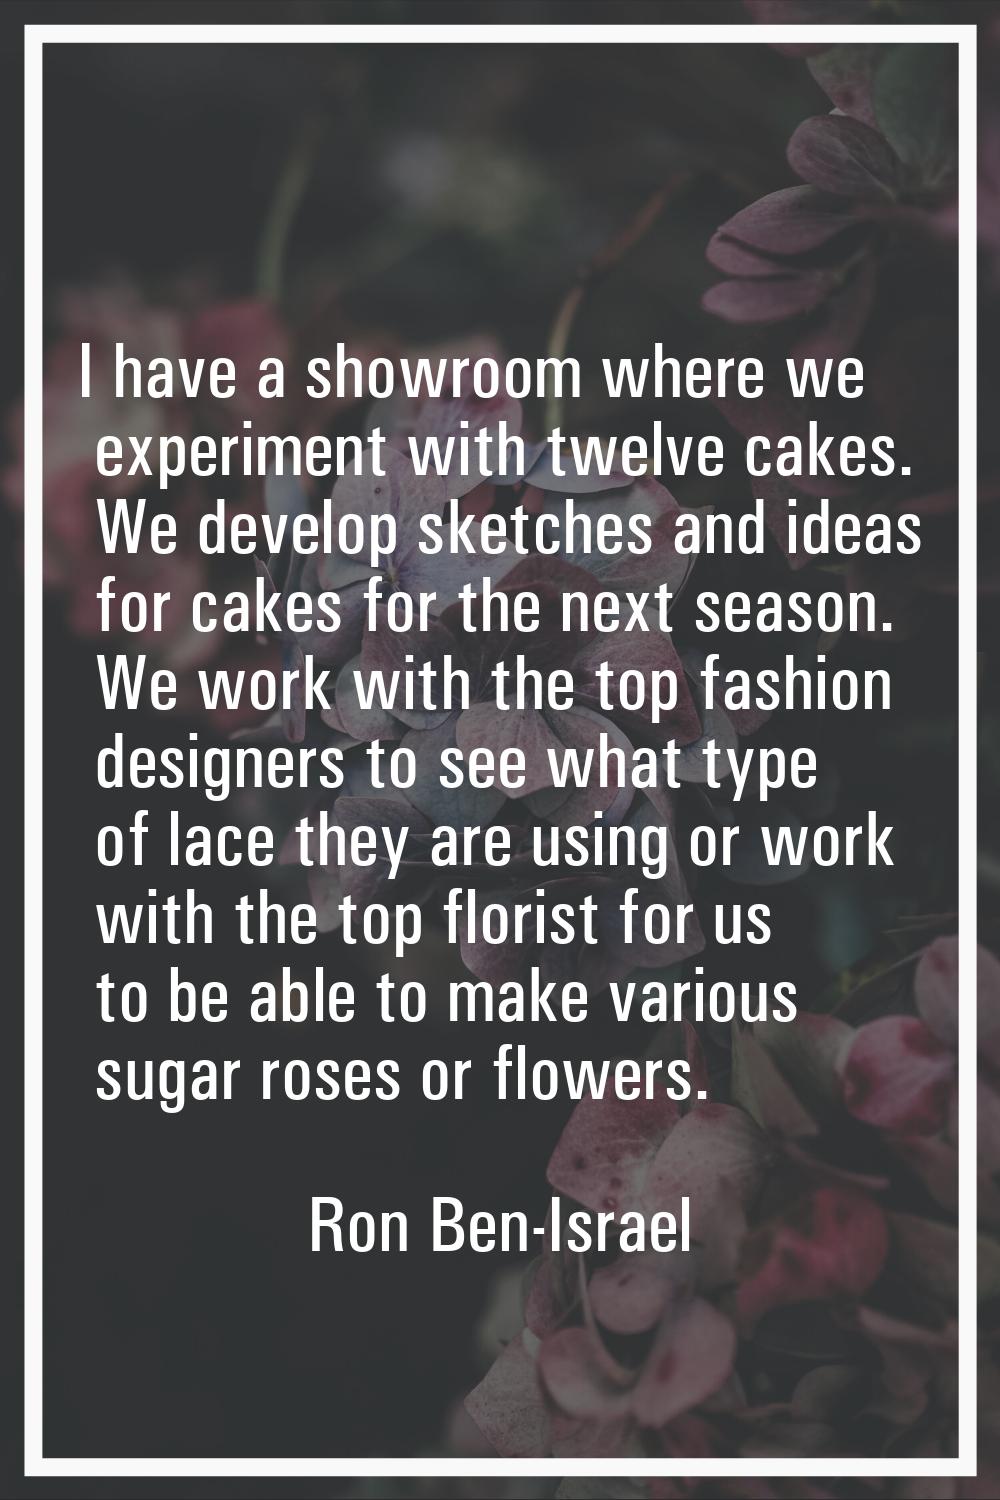 I have a showroom where we experiment with twelve cakes. We develop sketches and ideas for cakes fo